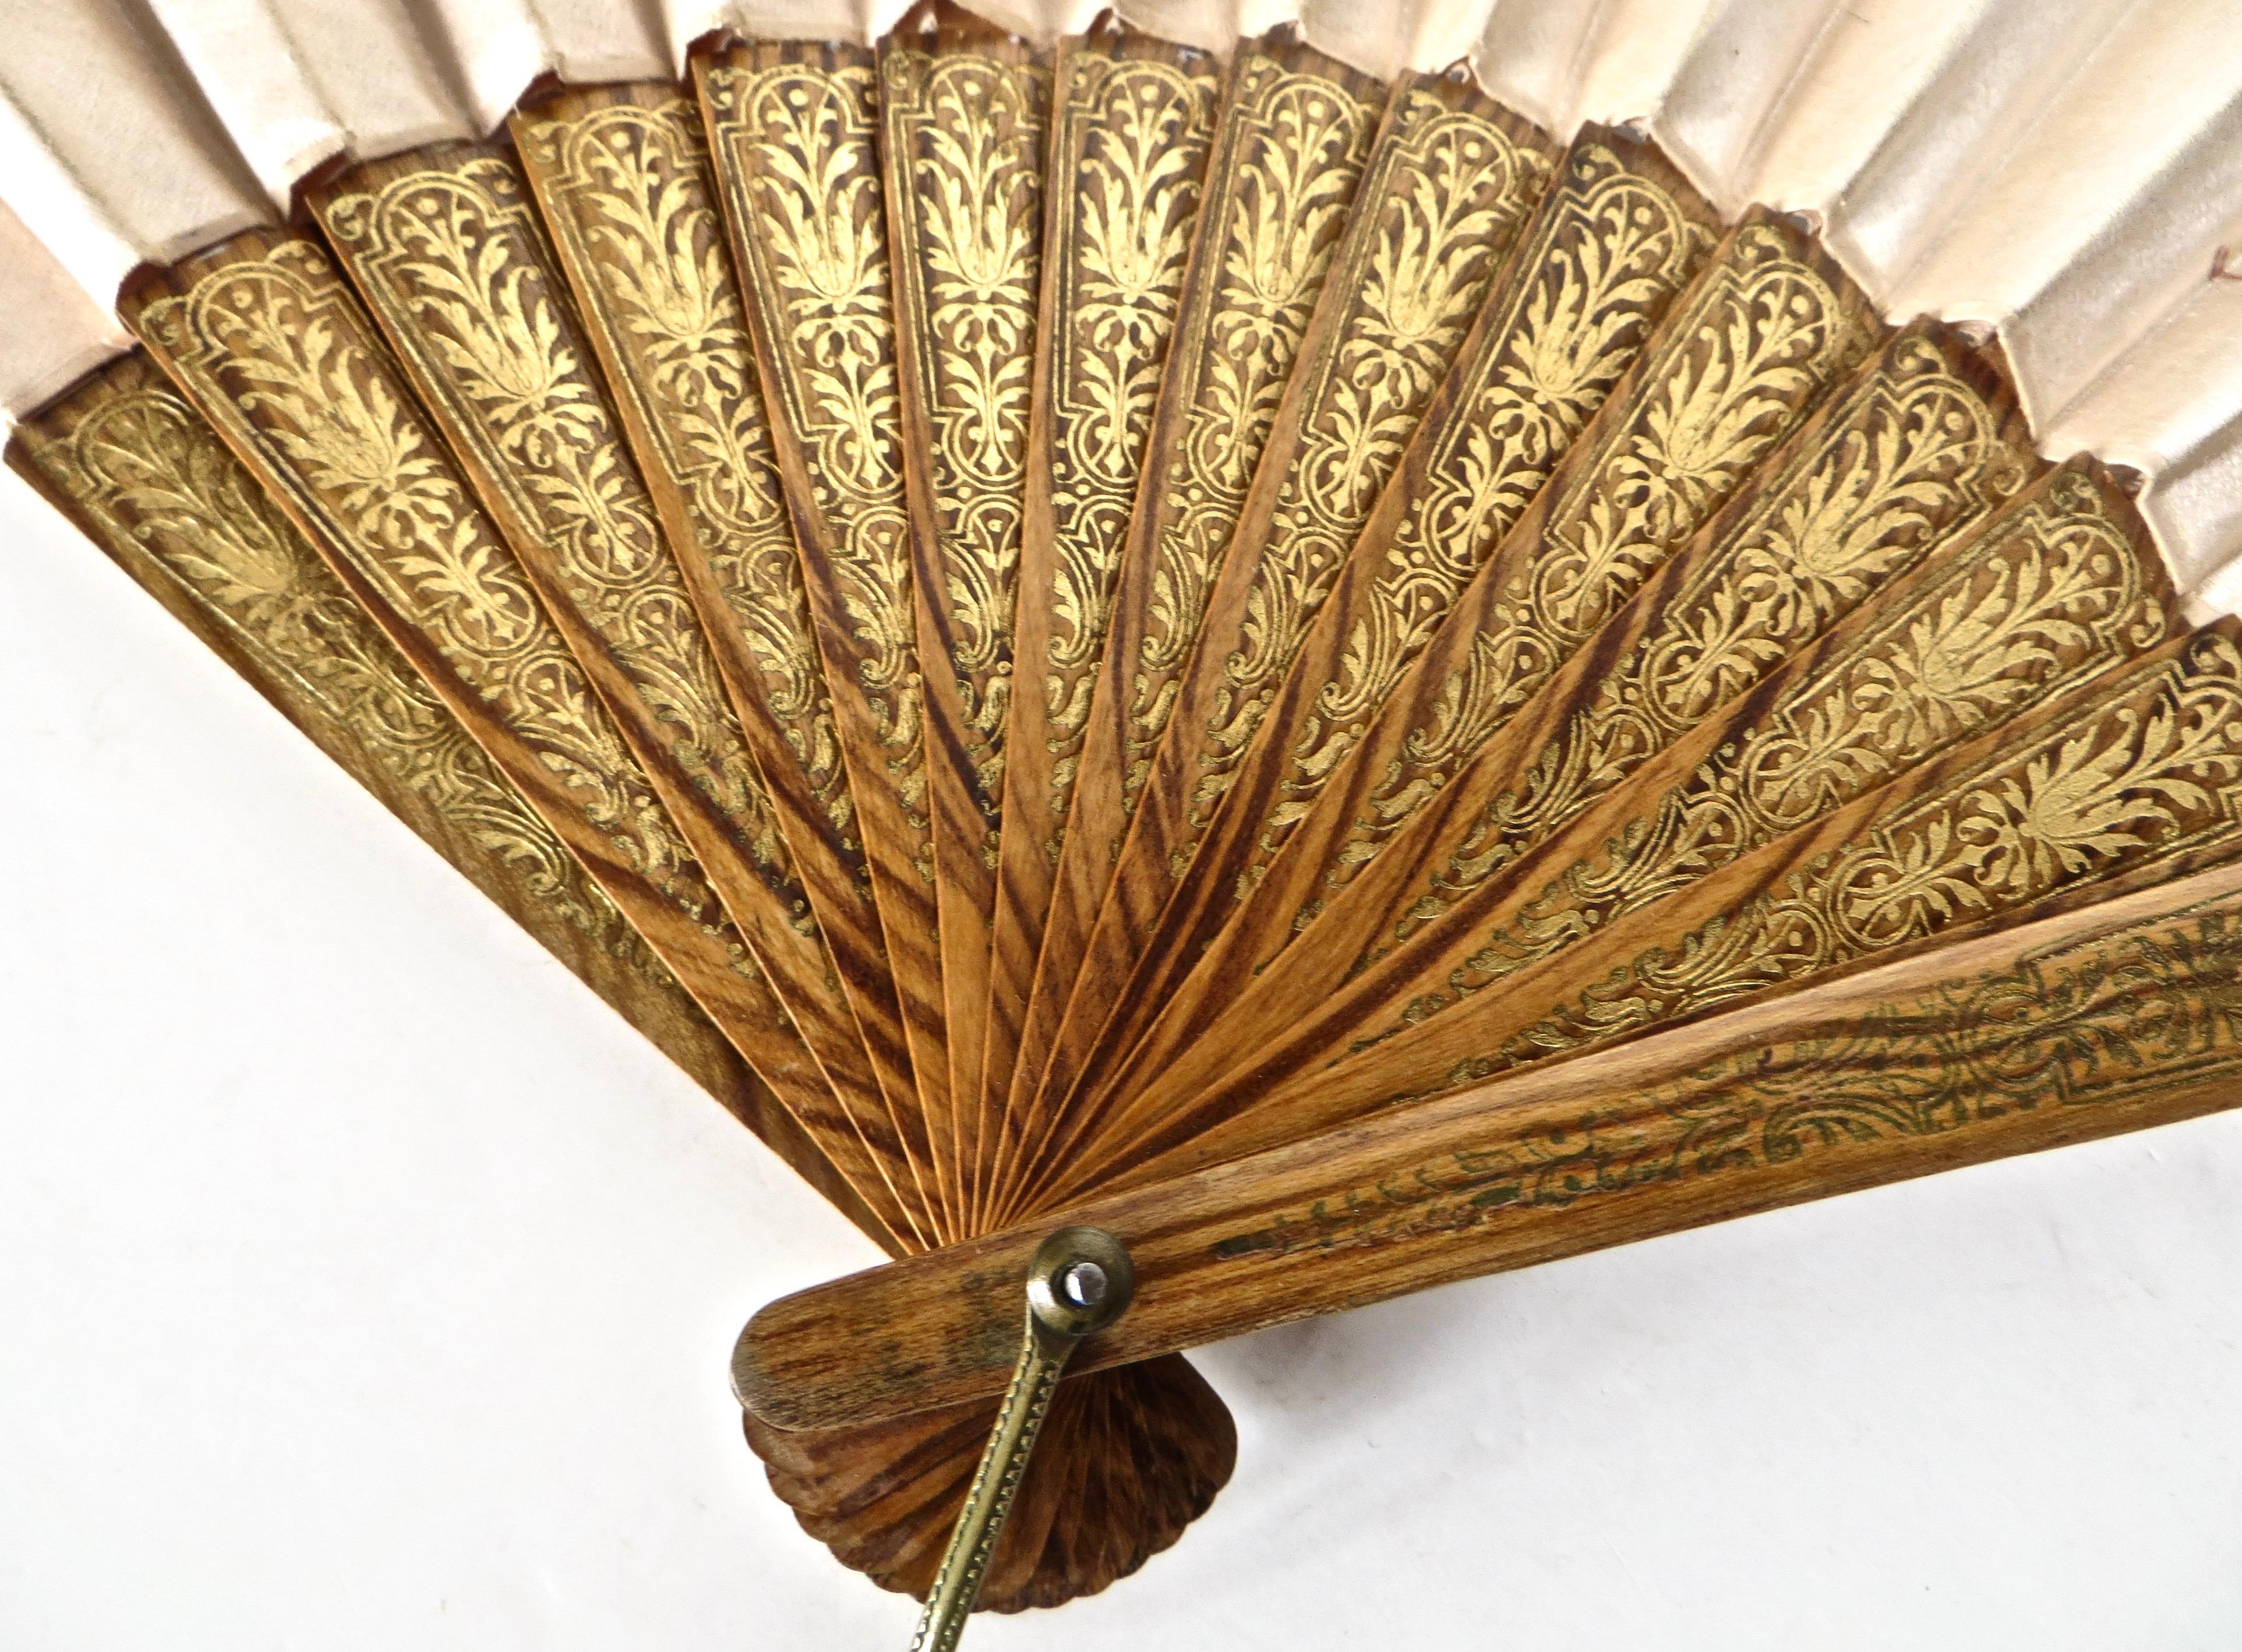 Hand held 19th century fan, circa 1880 is of European manufacture; probably French, and has seven hand painted floral bouquet designs in pretty colors of blue and gold, on champagne colored fabric. The top 3